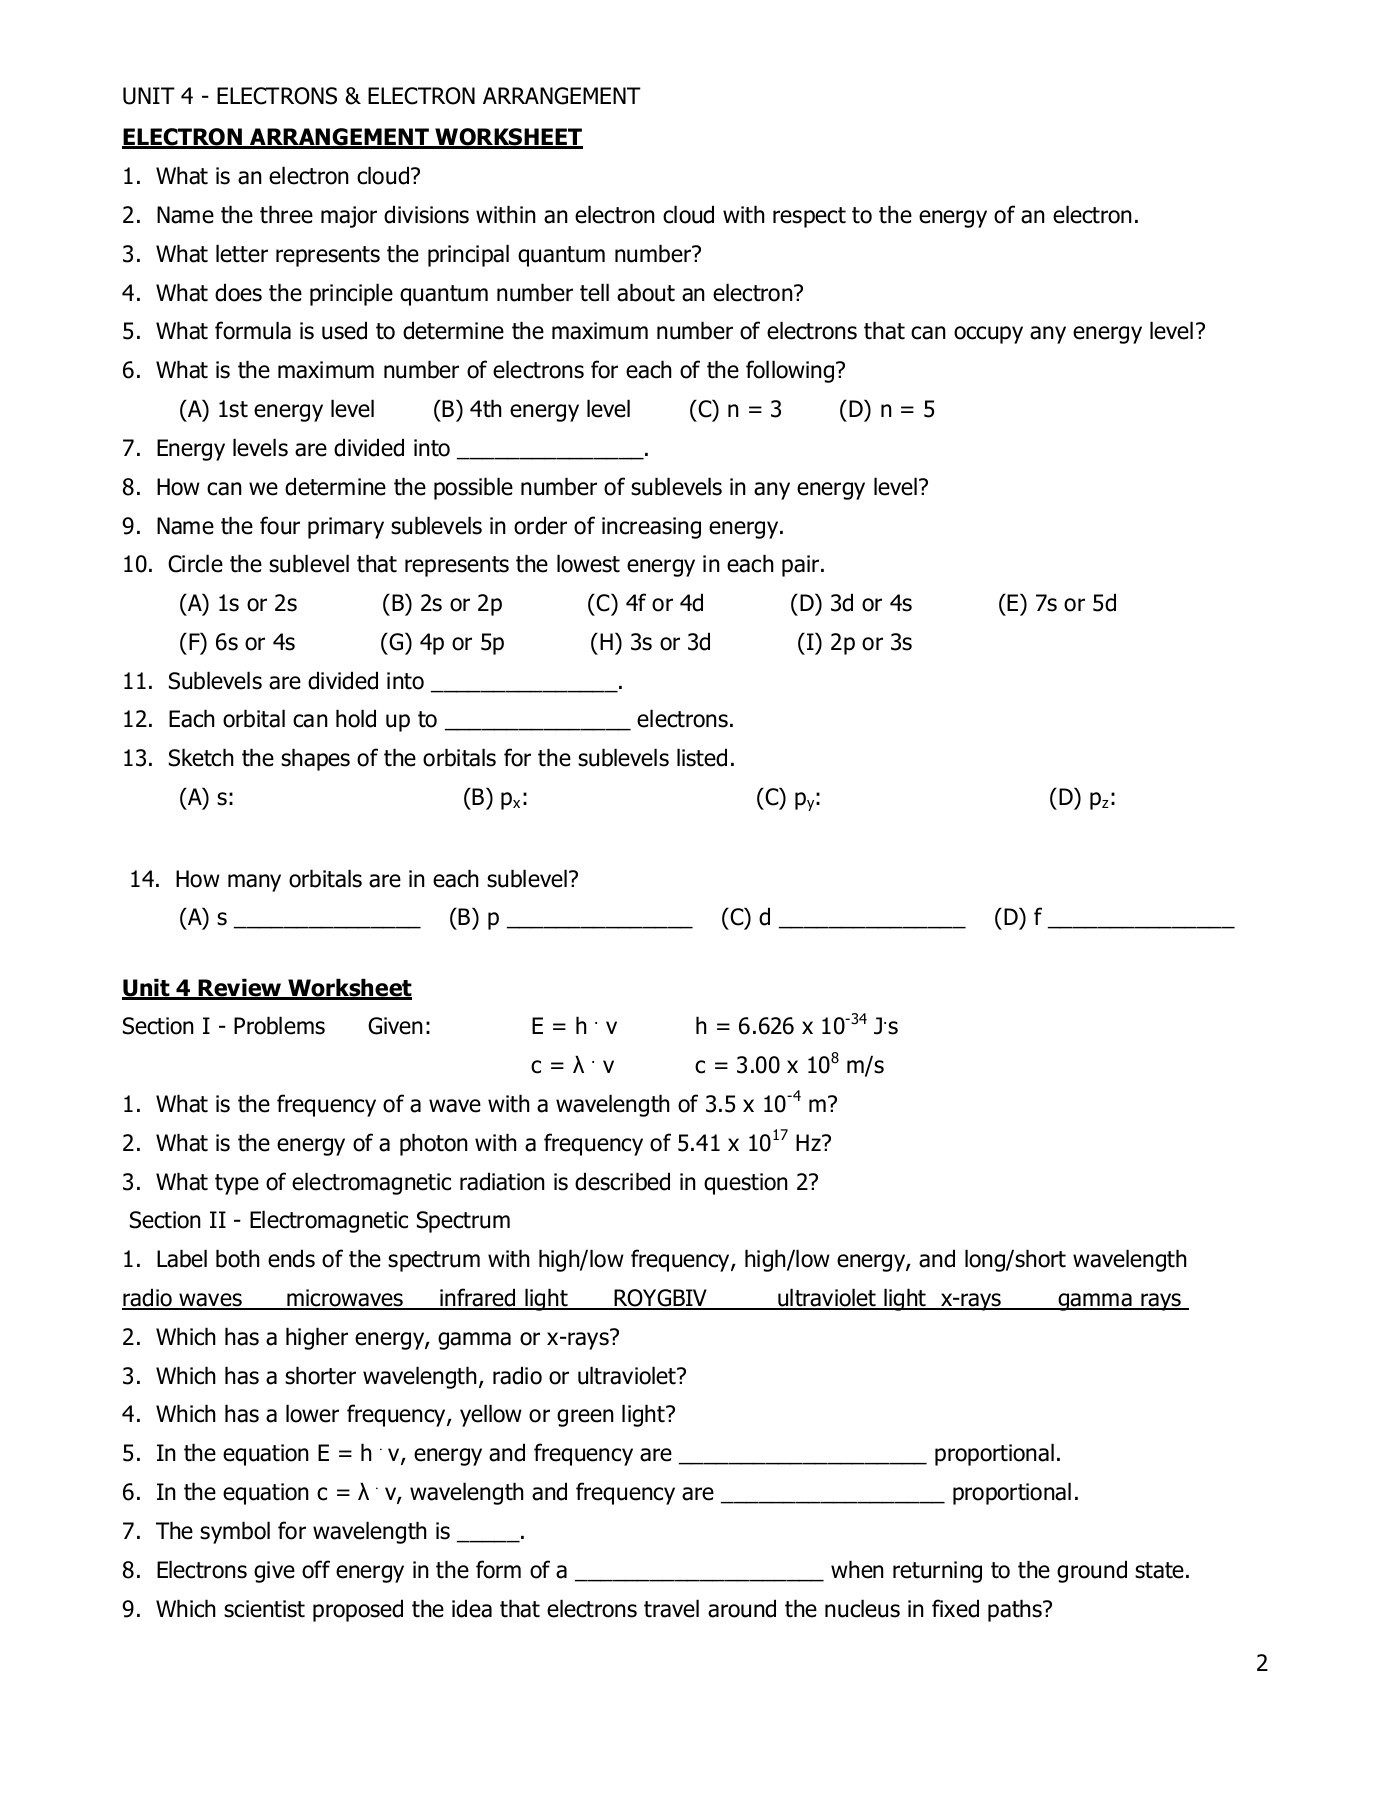 The Electromagnetic Spectrum Worksheet Answers Em Spectrum Wavelength Frequency and Energy Worksheet